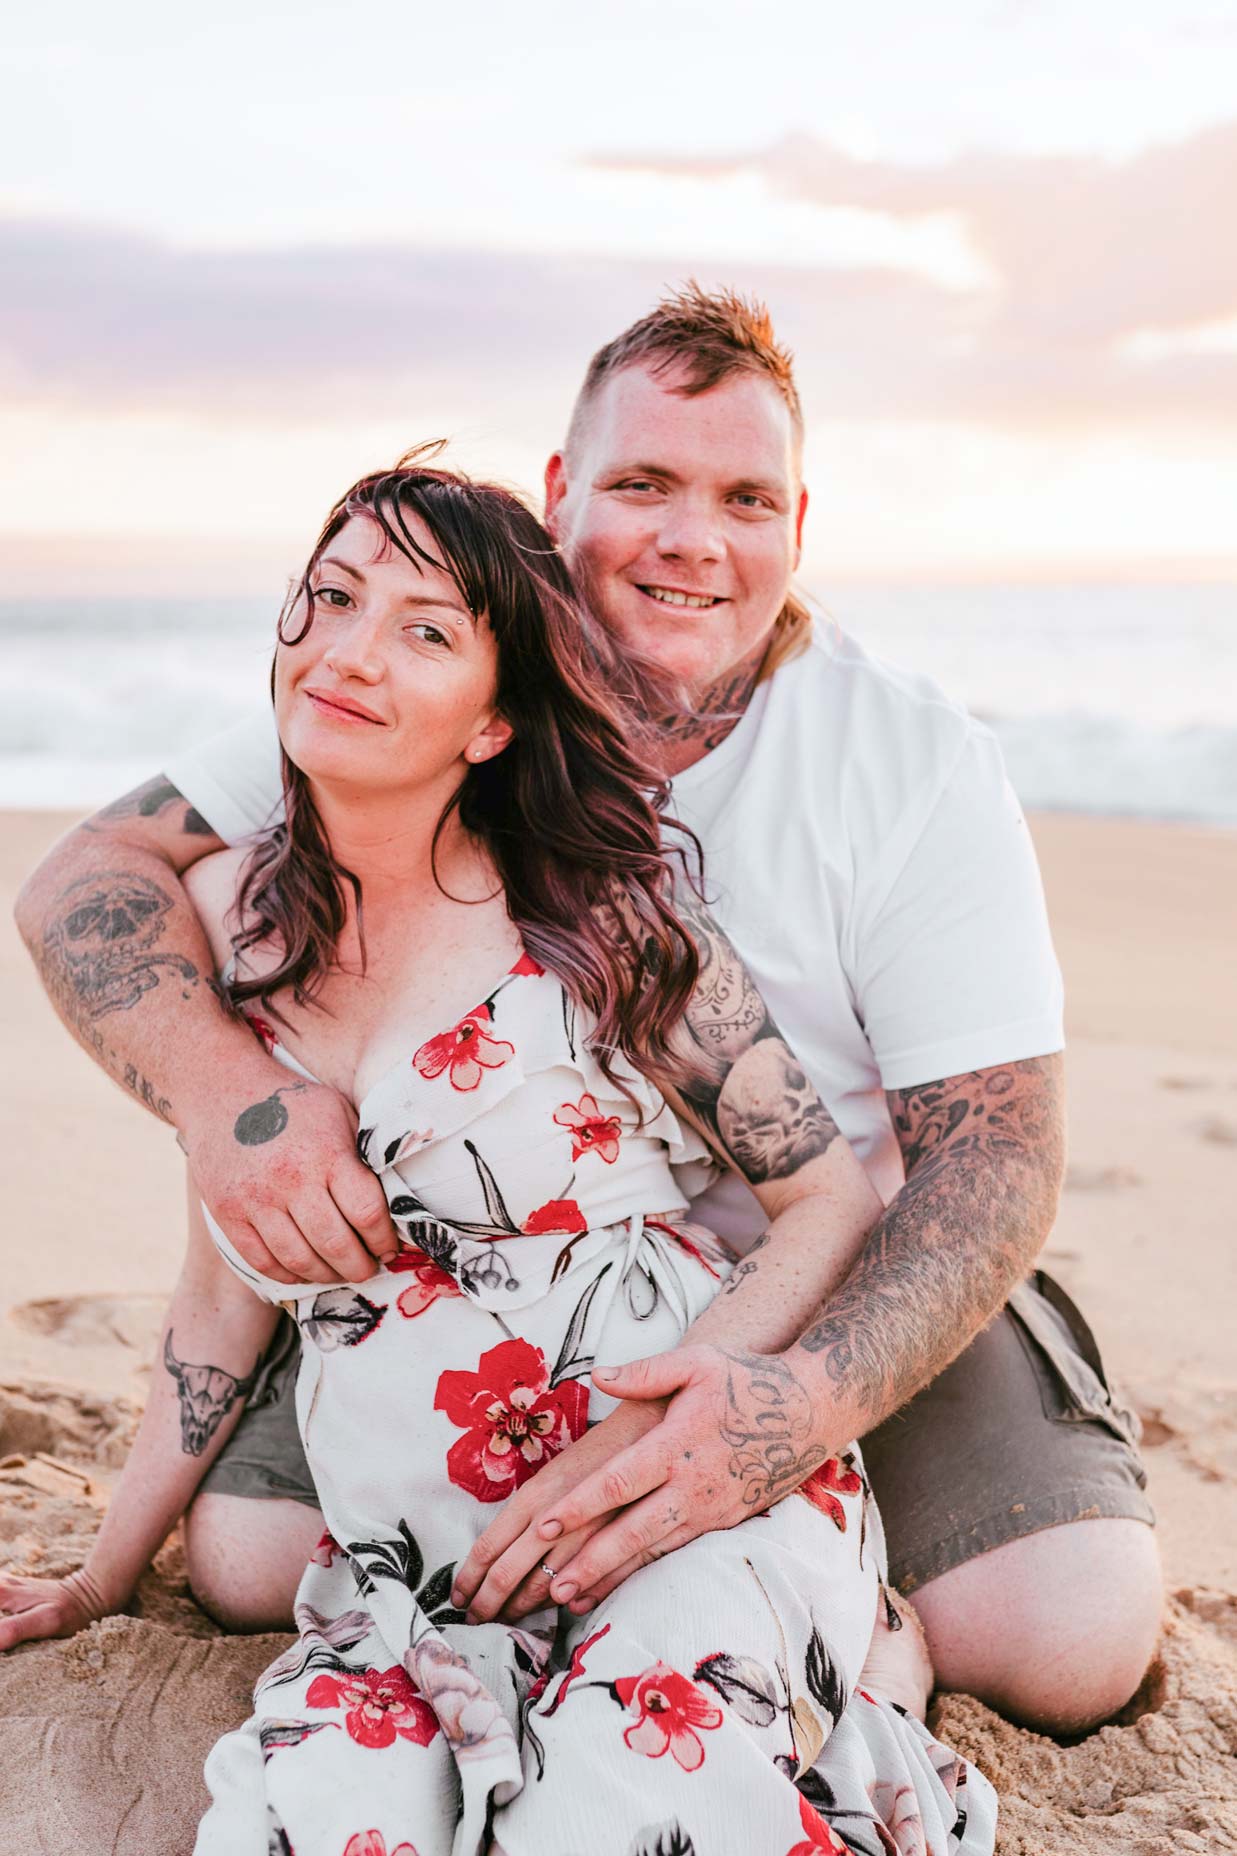 Man in white shirt and gray shorts holds pregnant wife in white dress with red flowers from behind lovingly on an Australian beach